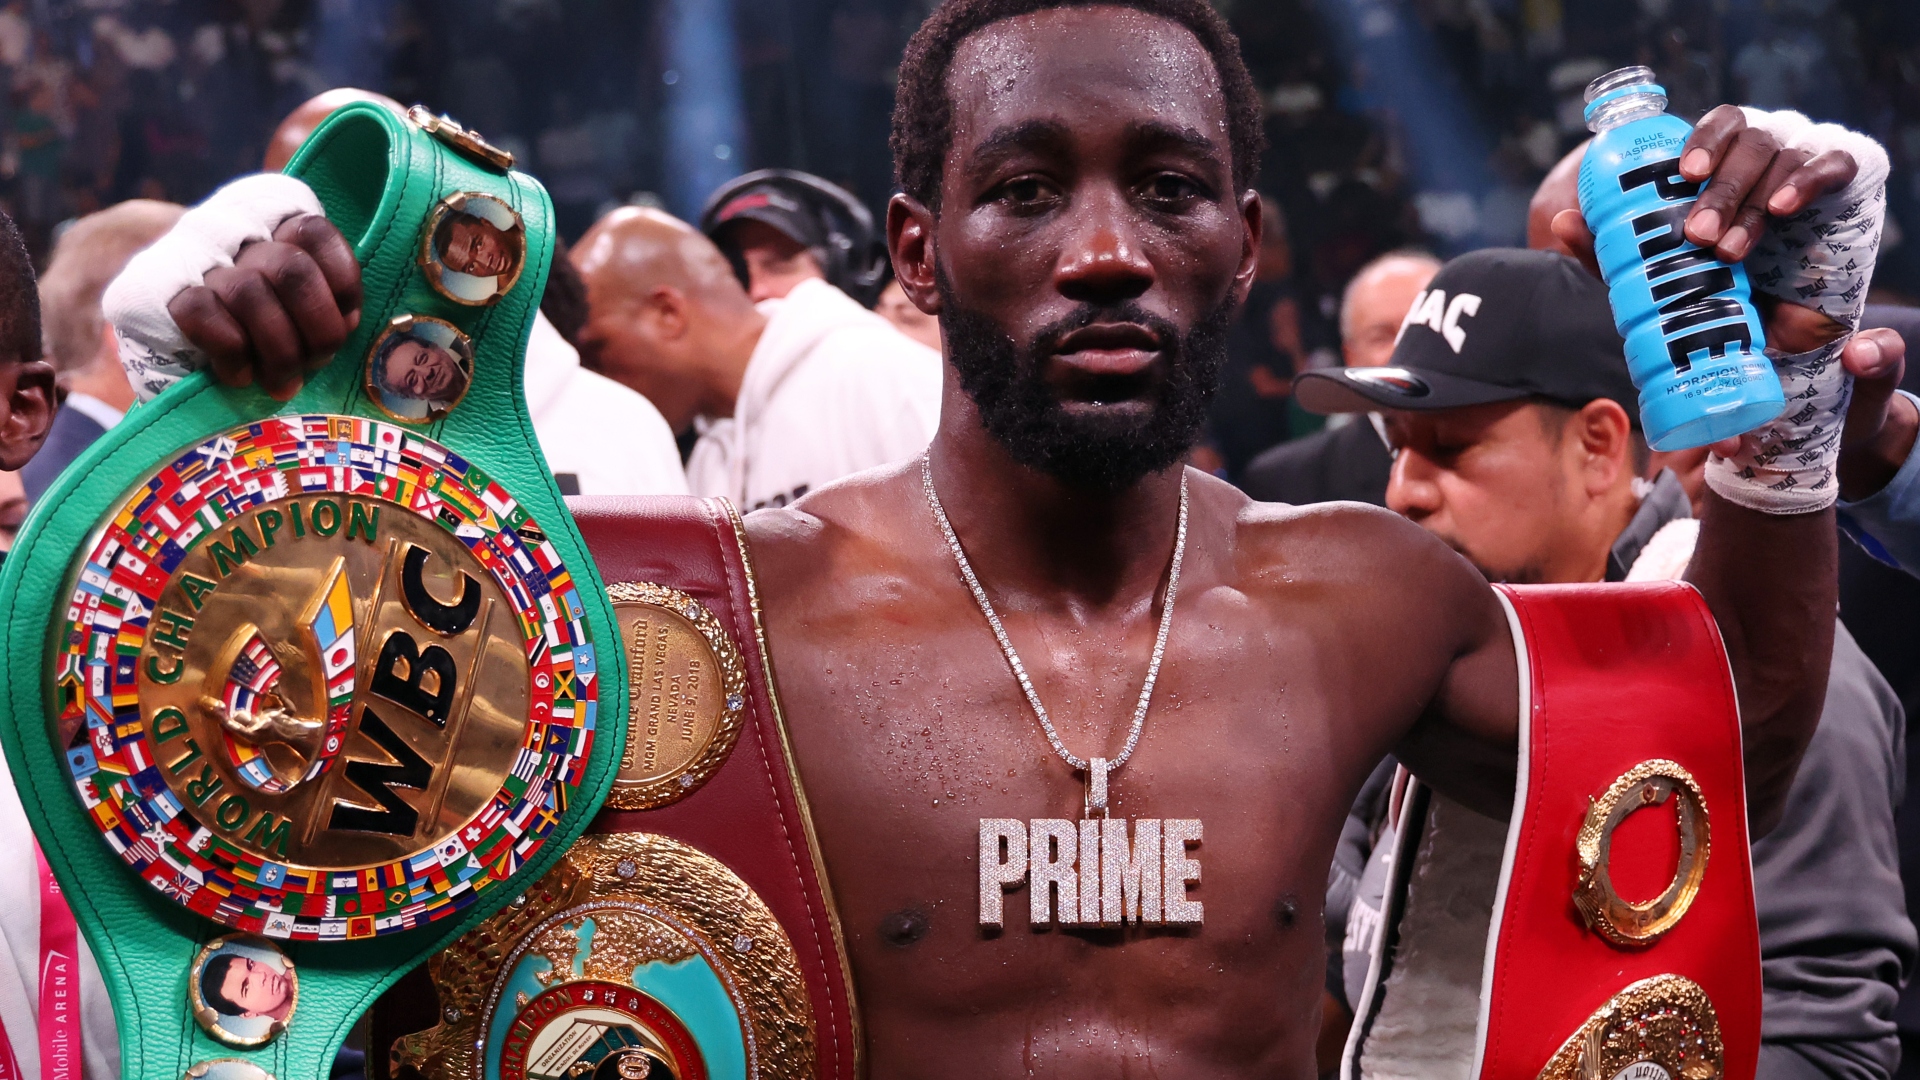 terence crawford vs. jaron ennis - eddie hearn provides a big update on potential bout